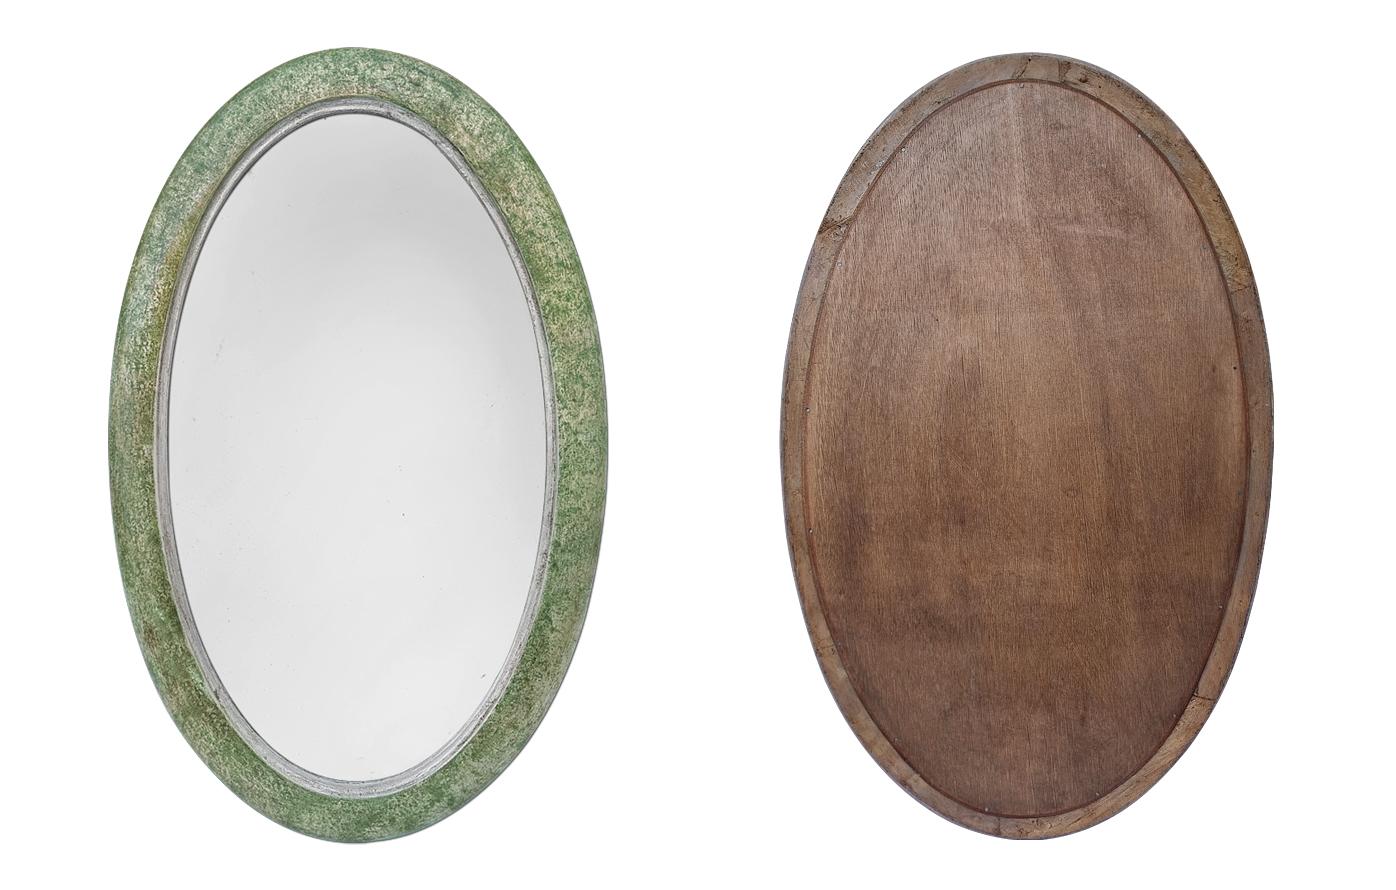 Antique French Oval Mirror, Green Patina, circa 1950 For Sale 2